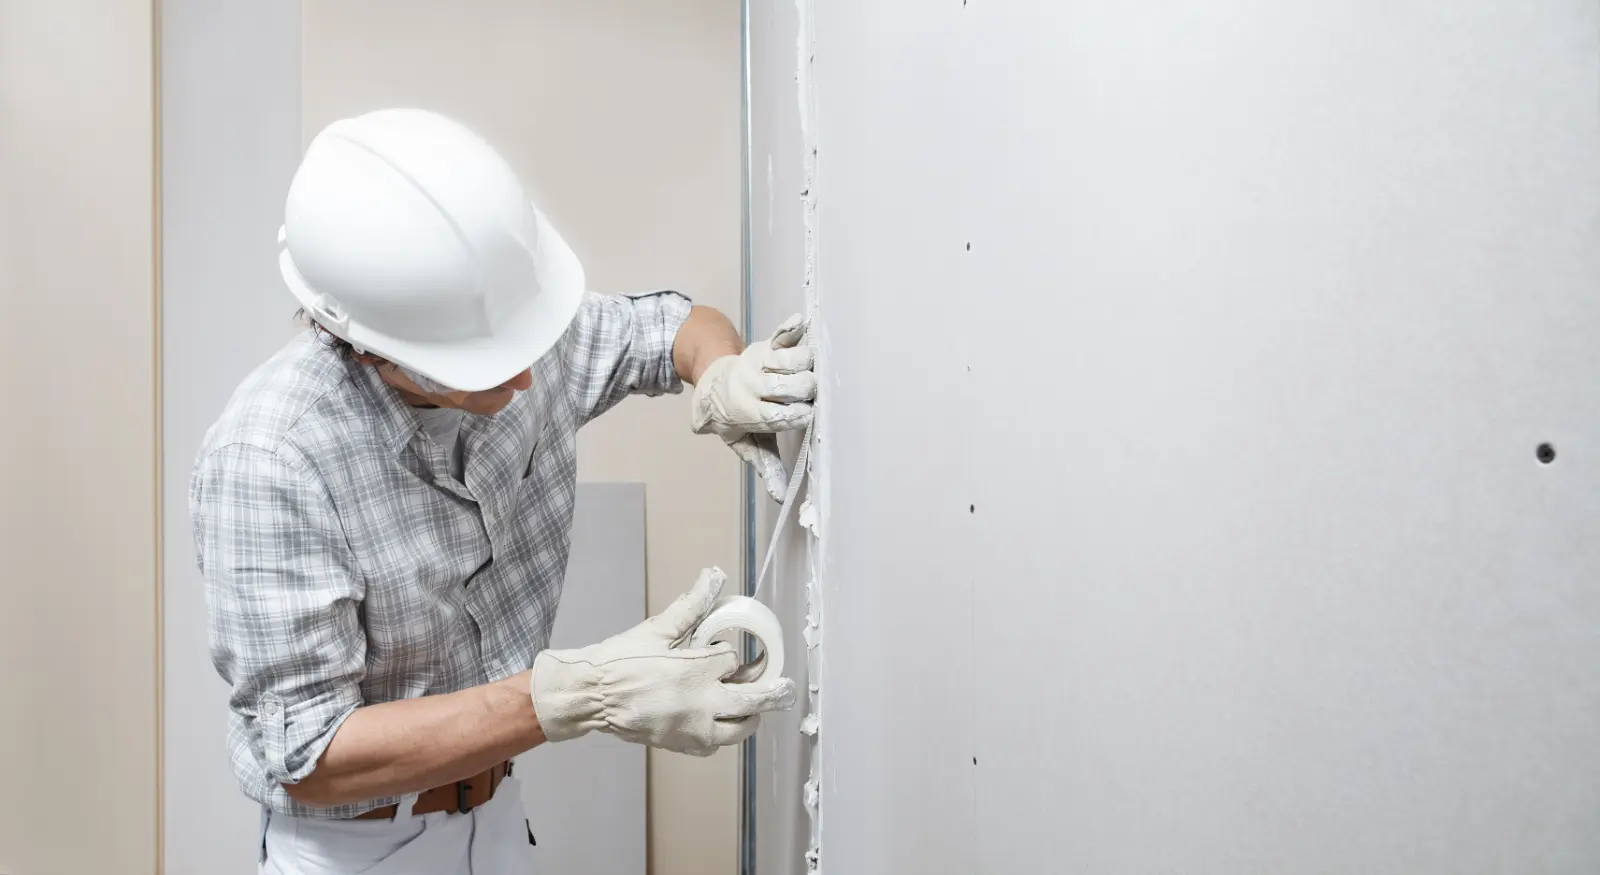 Drywall Mudding. man drywall worker or plasterer putting mesh tape for plasterboard on a wall using a spatula and plaster.